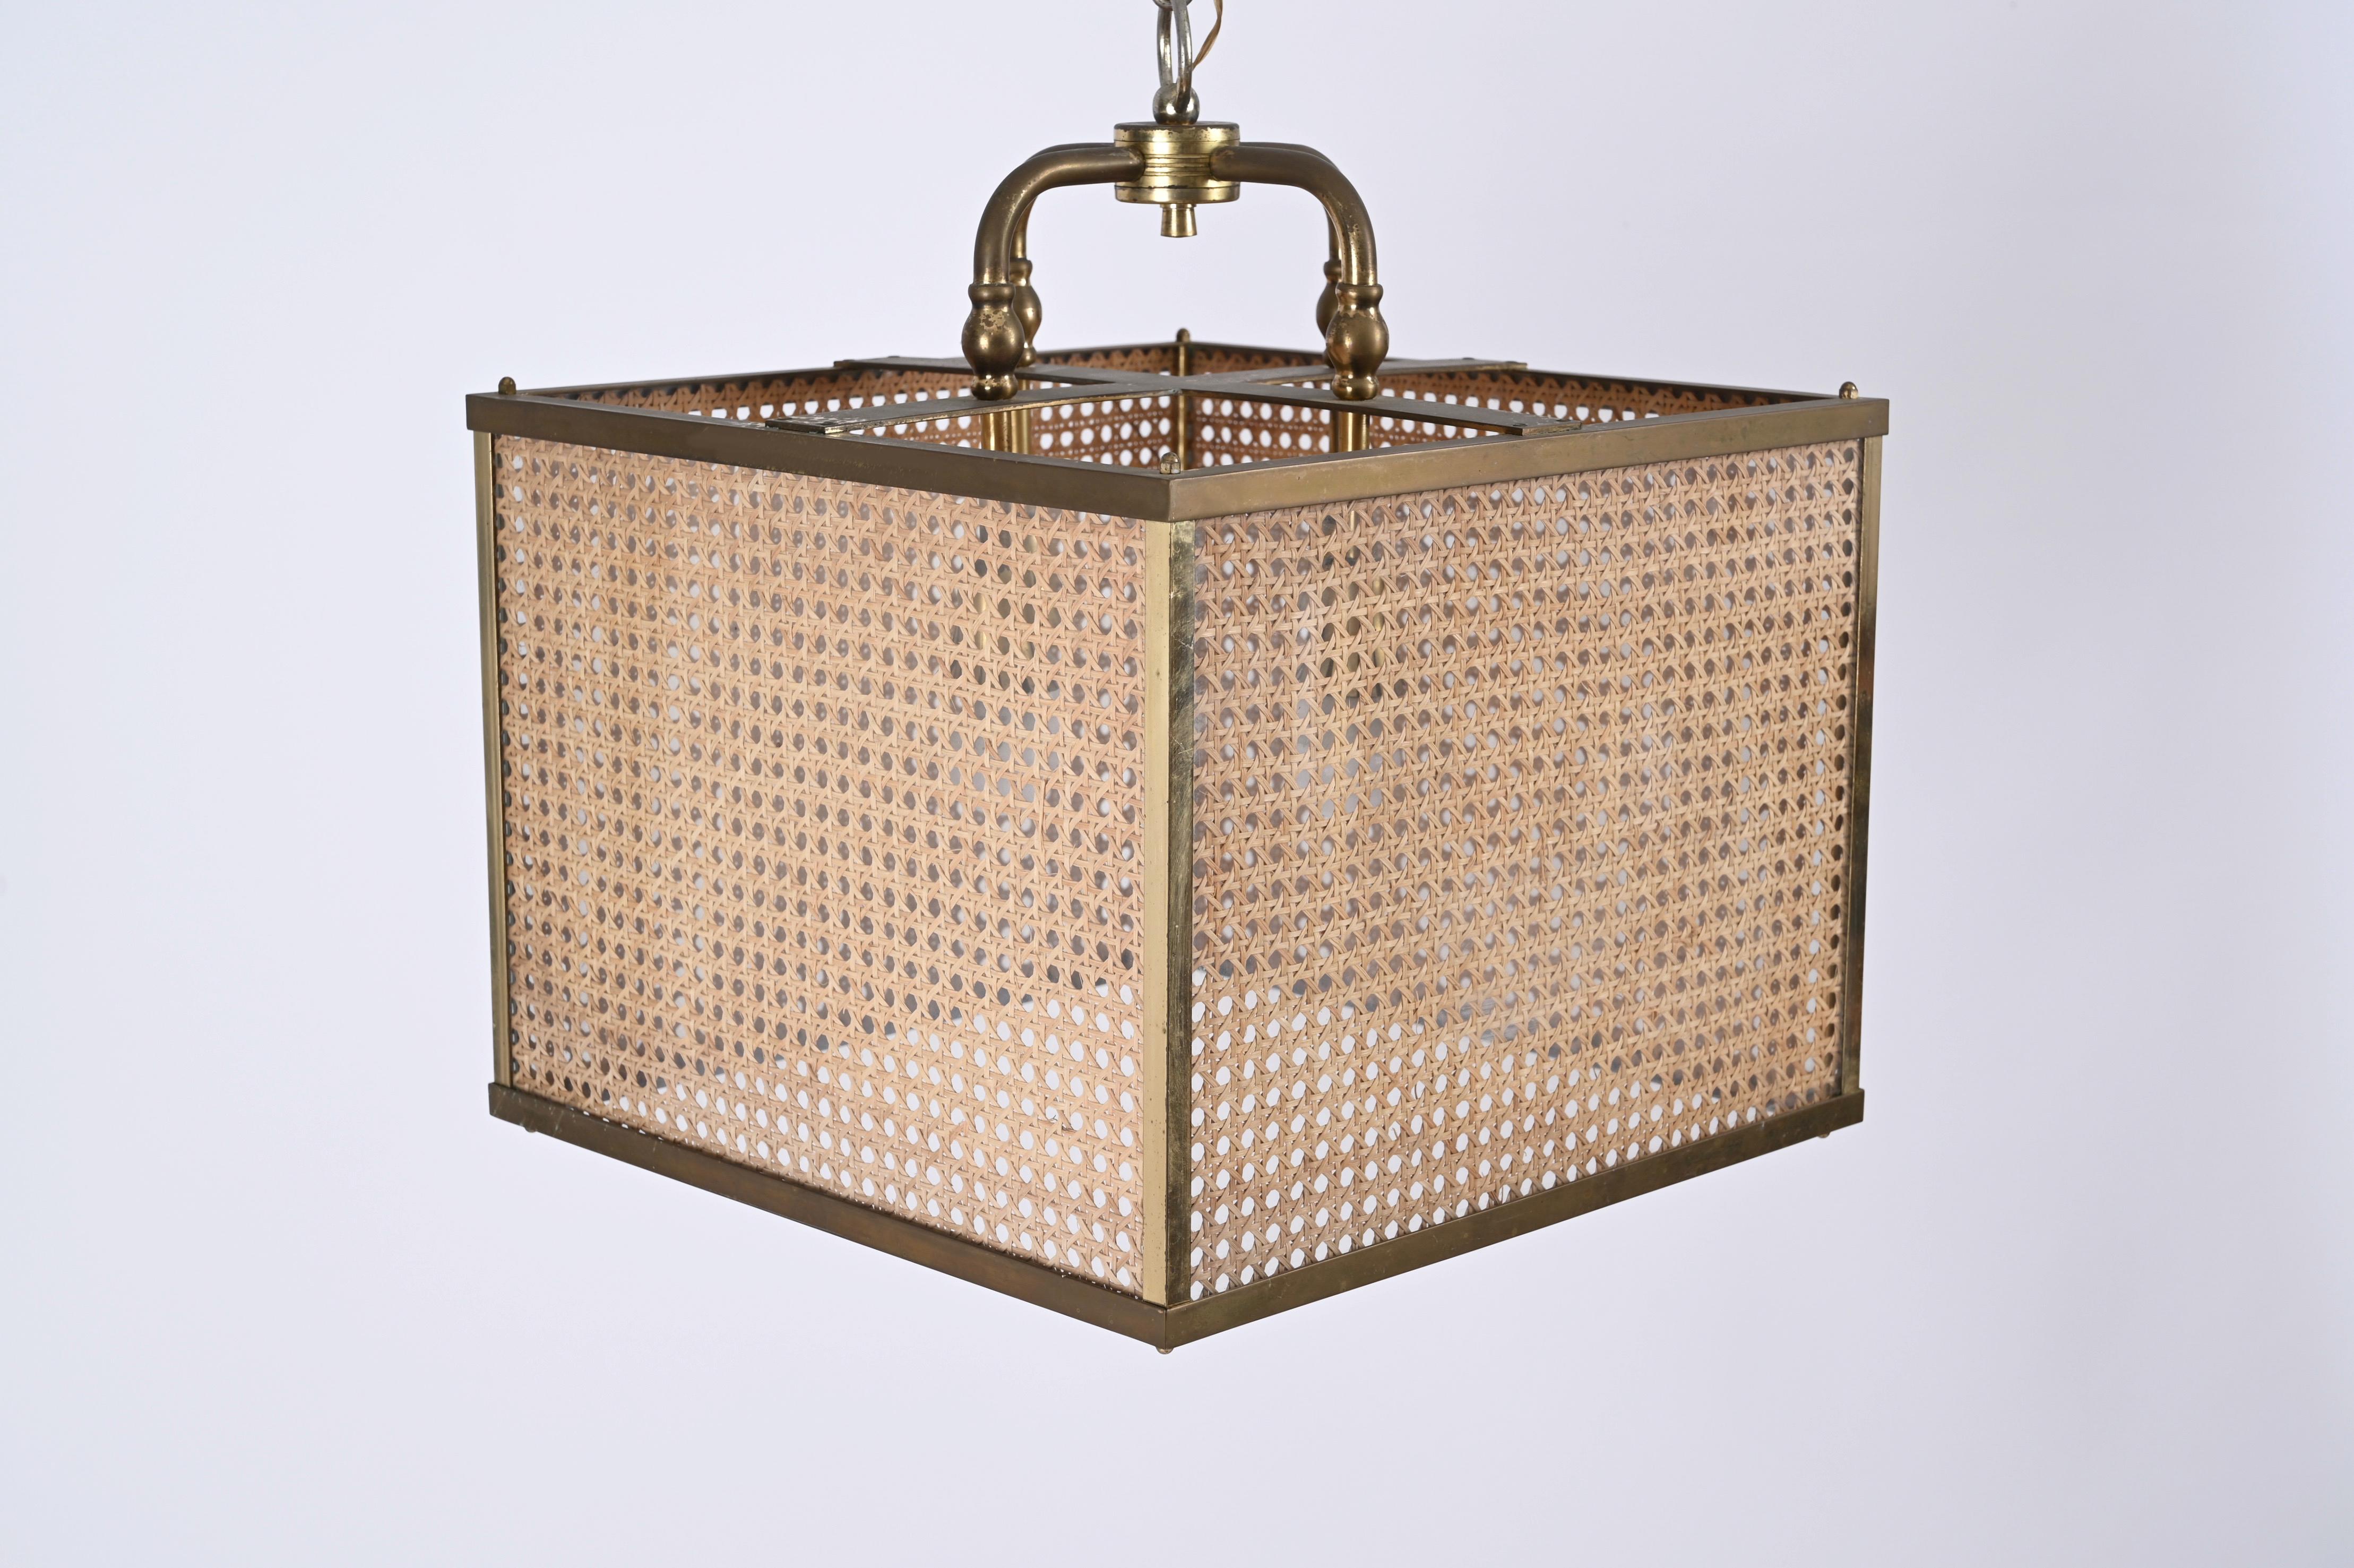 Brass, Vienna Straw Wicker and Glass Square Chandelier Lamp, Italy, 1950s For Sale 3